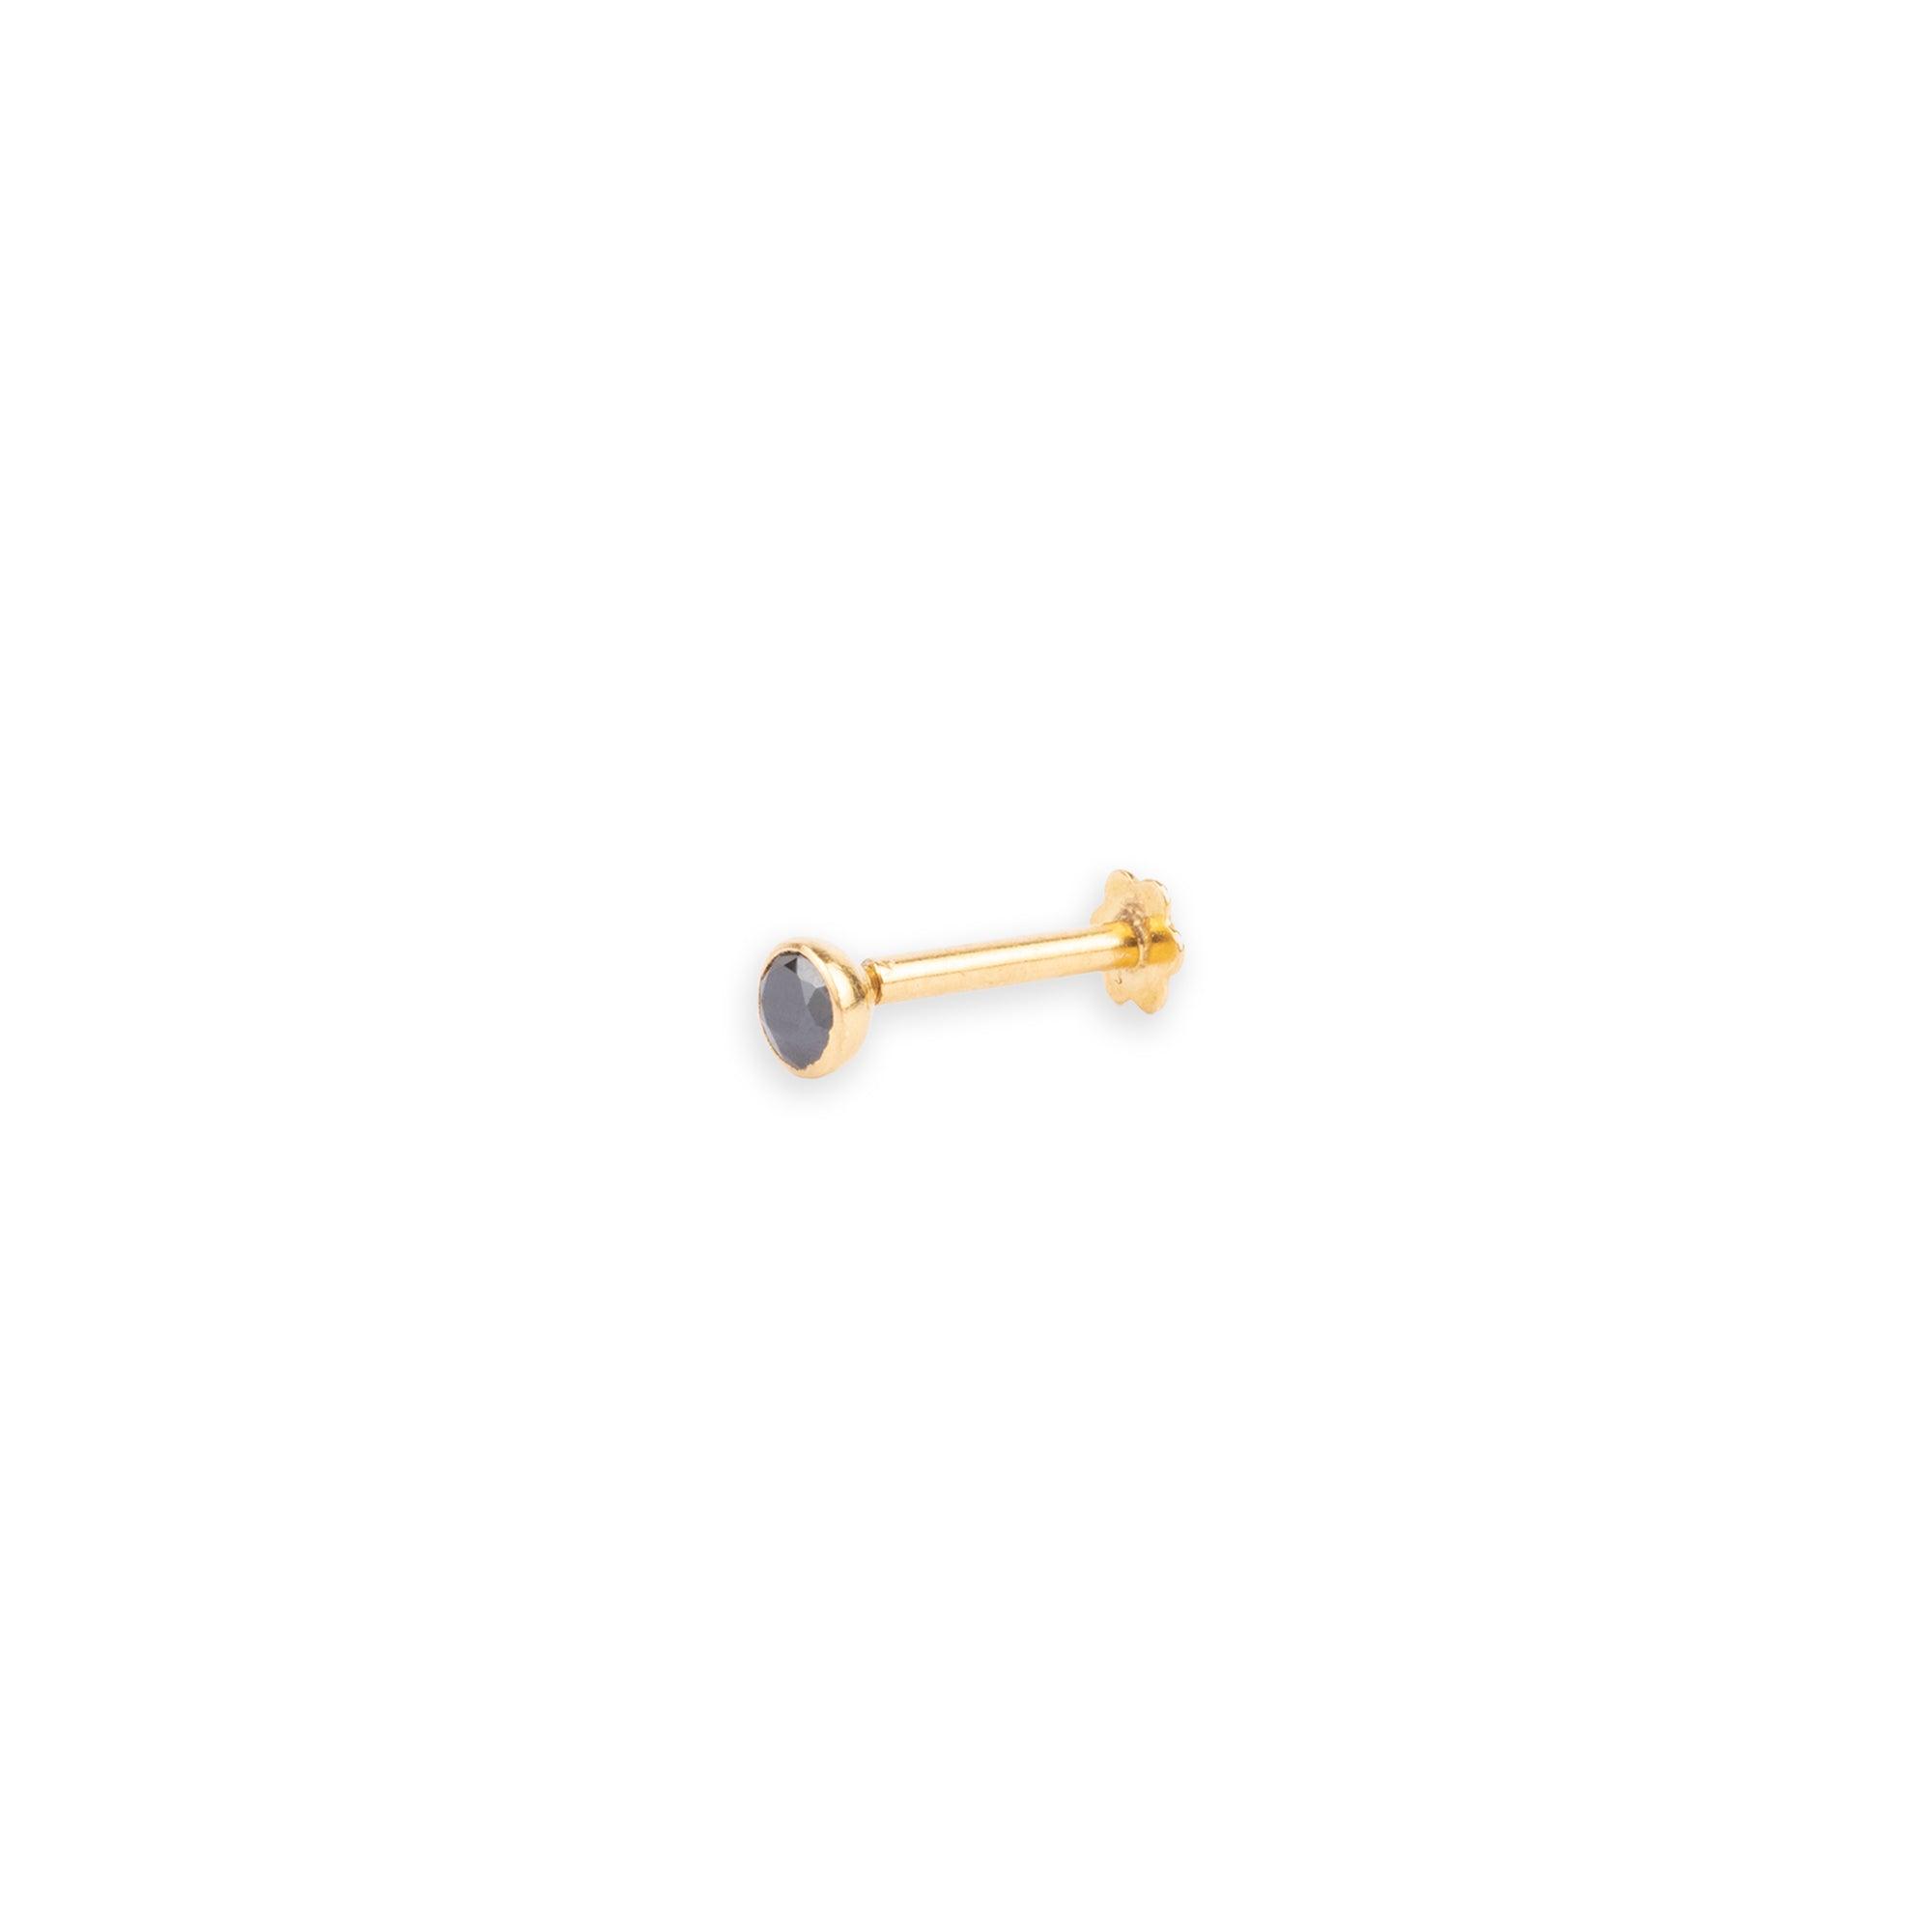 18ct Yellow Gold Screw Back Nose Stud with Cubic Zirconia in a Rub Over (Bezel) Setting NS-2880